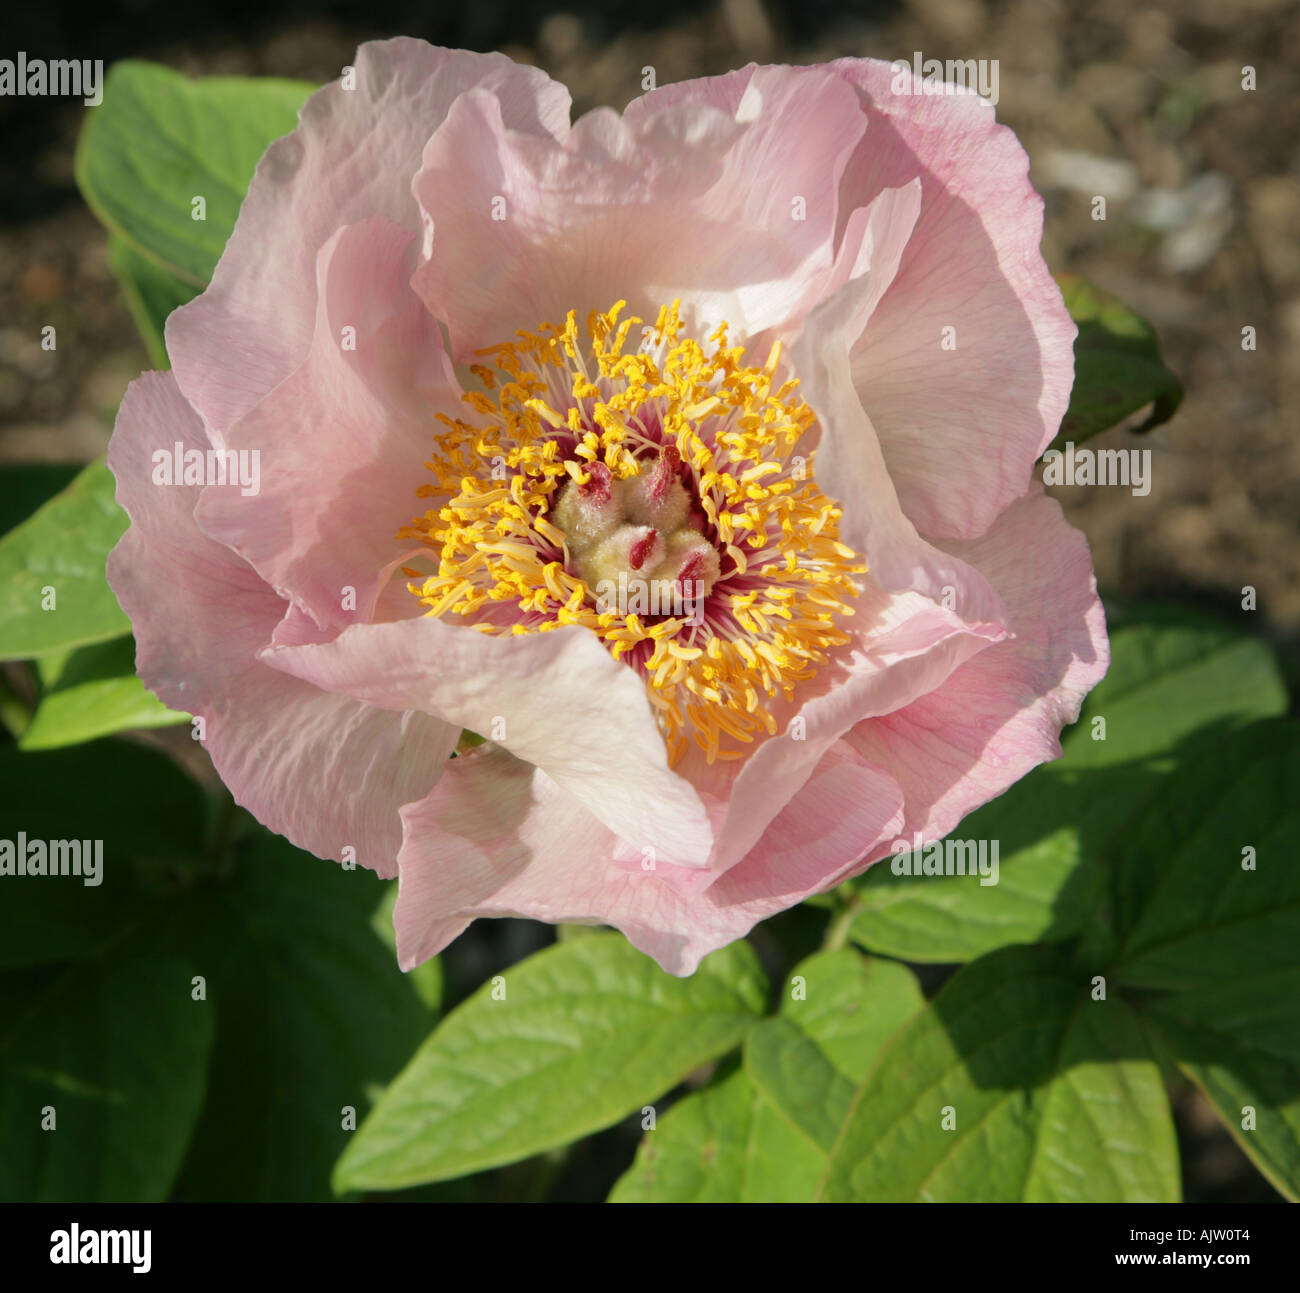 Paeony Glasnevin herbaceous perennial deveoped at National Botantic Gardens Glasnevin Ireland Stock Photo